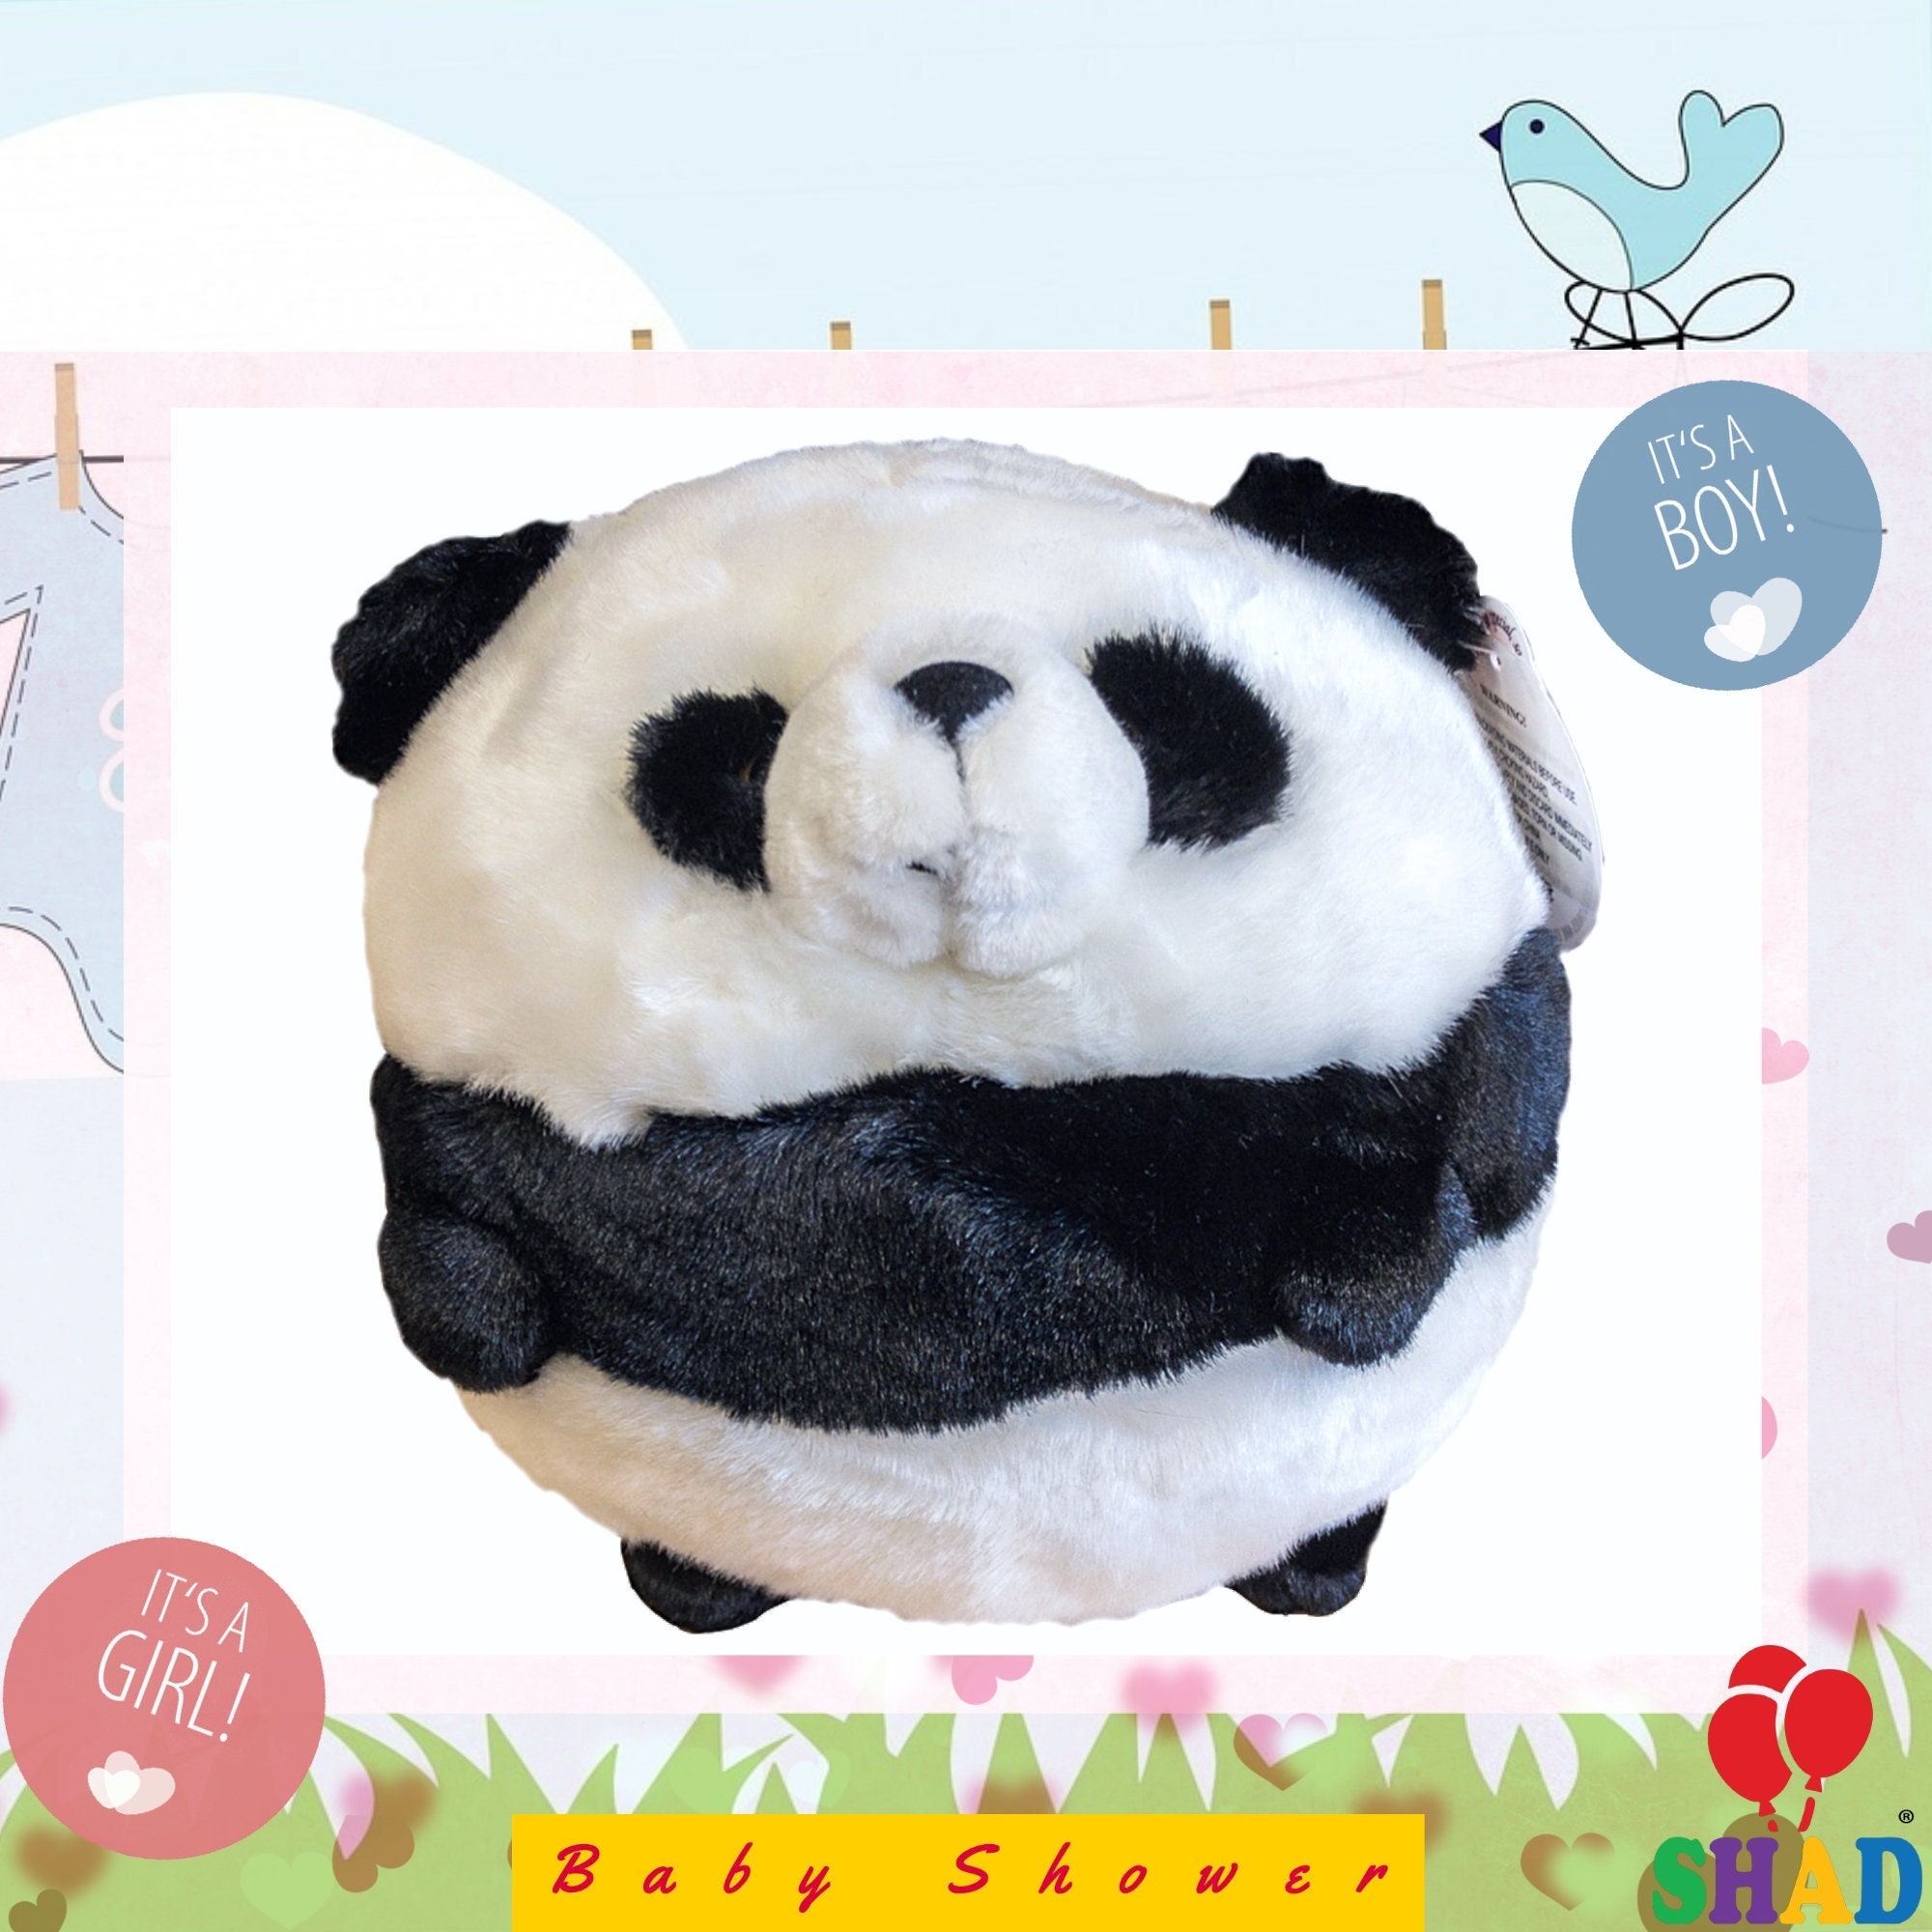 Panda Bear Plush Toy/Safe Stuffed Animal By SHAD Toy/Collectible Gift For Baby 